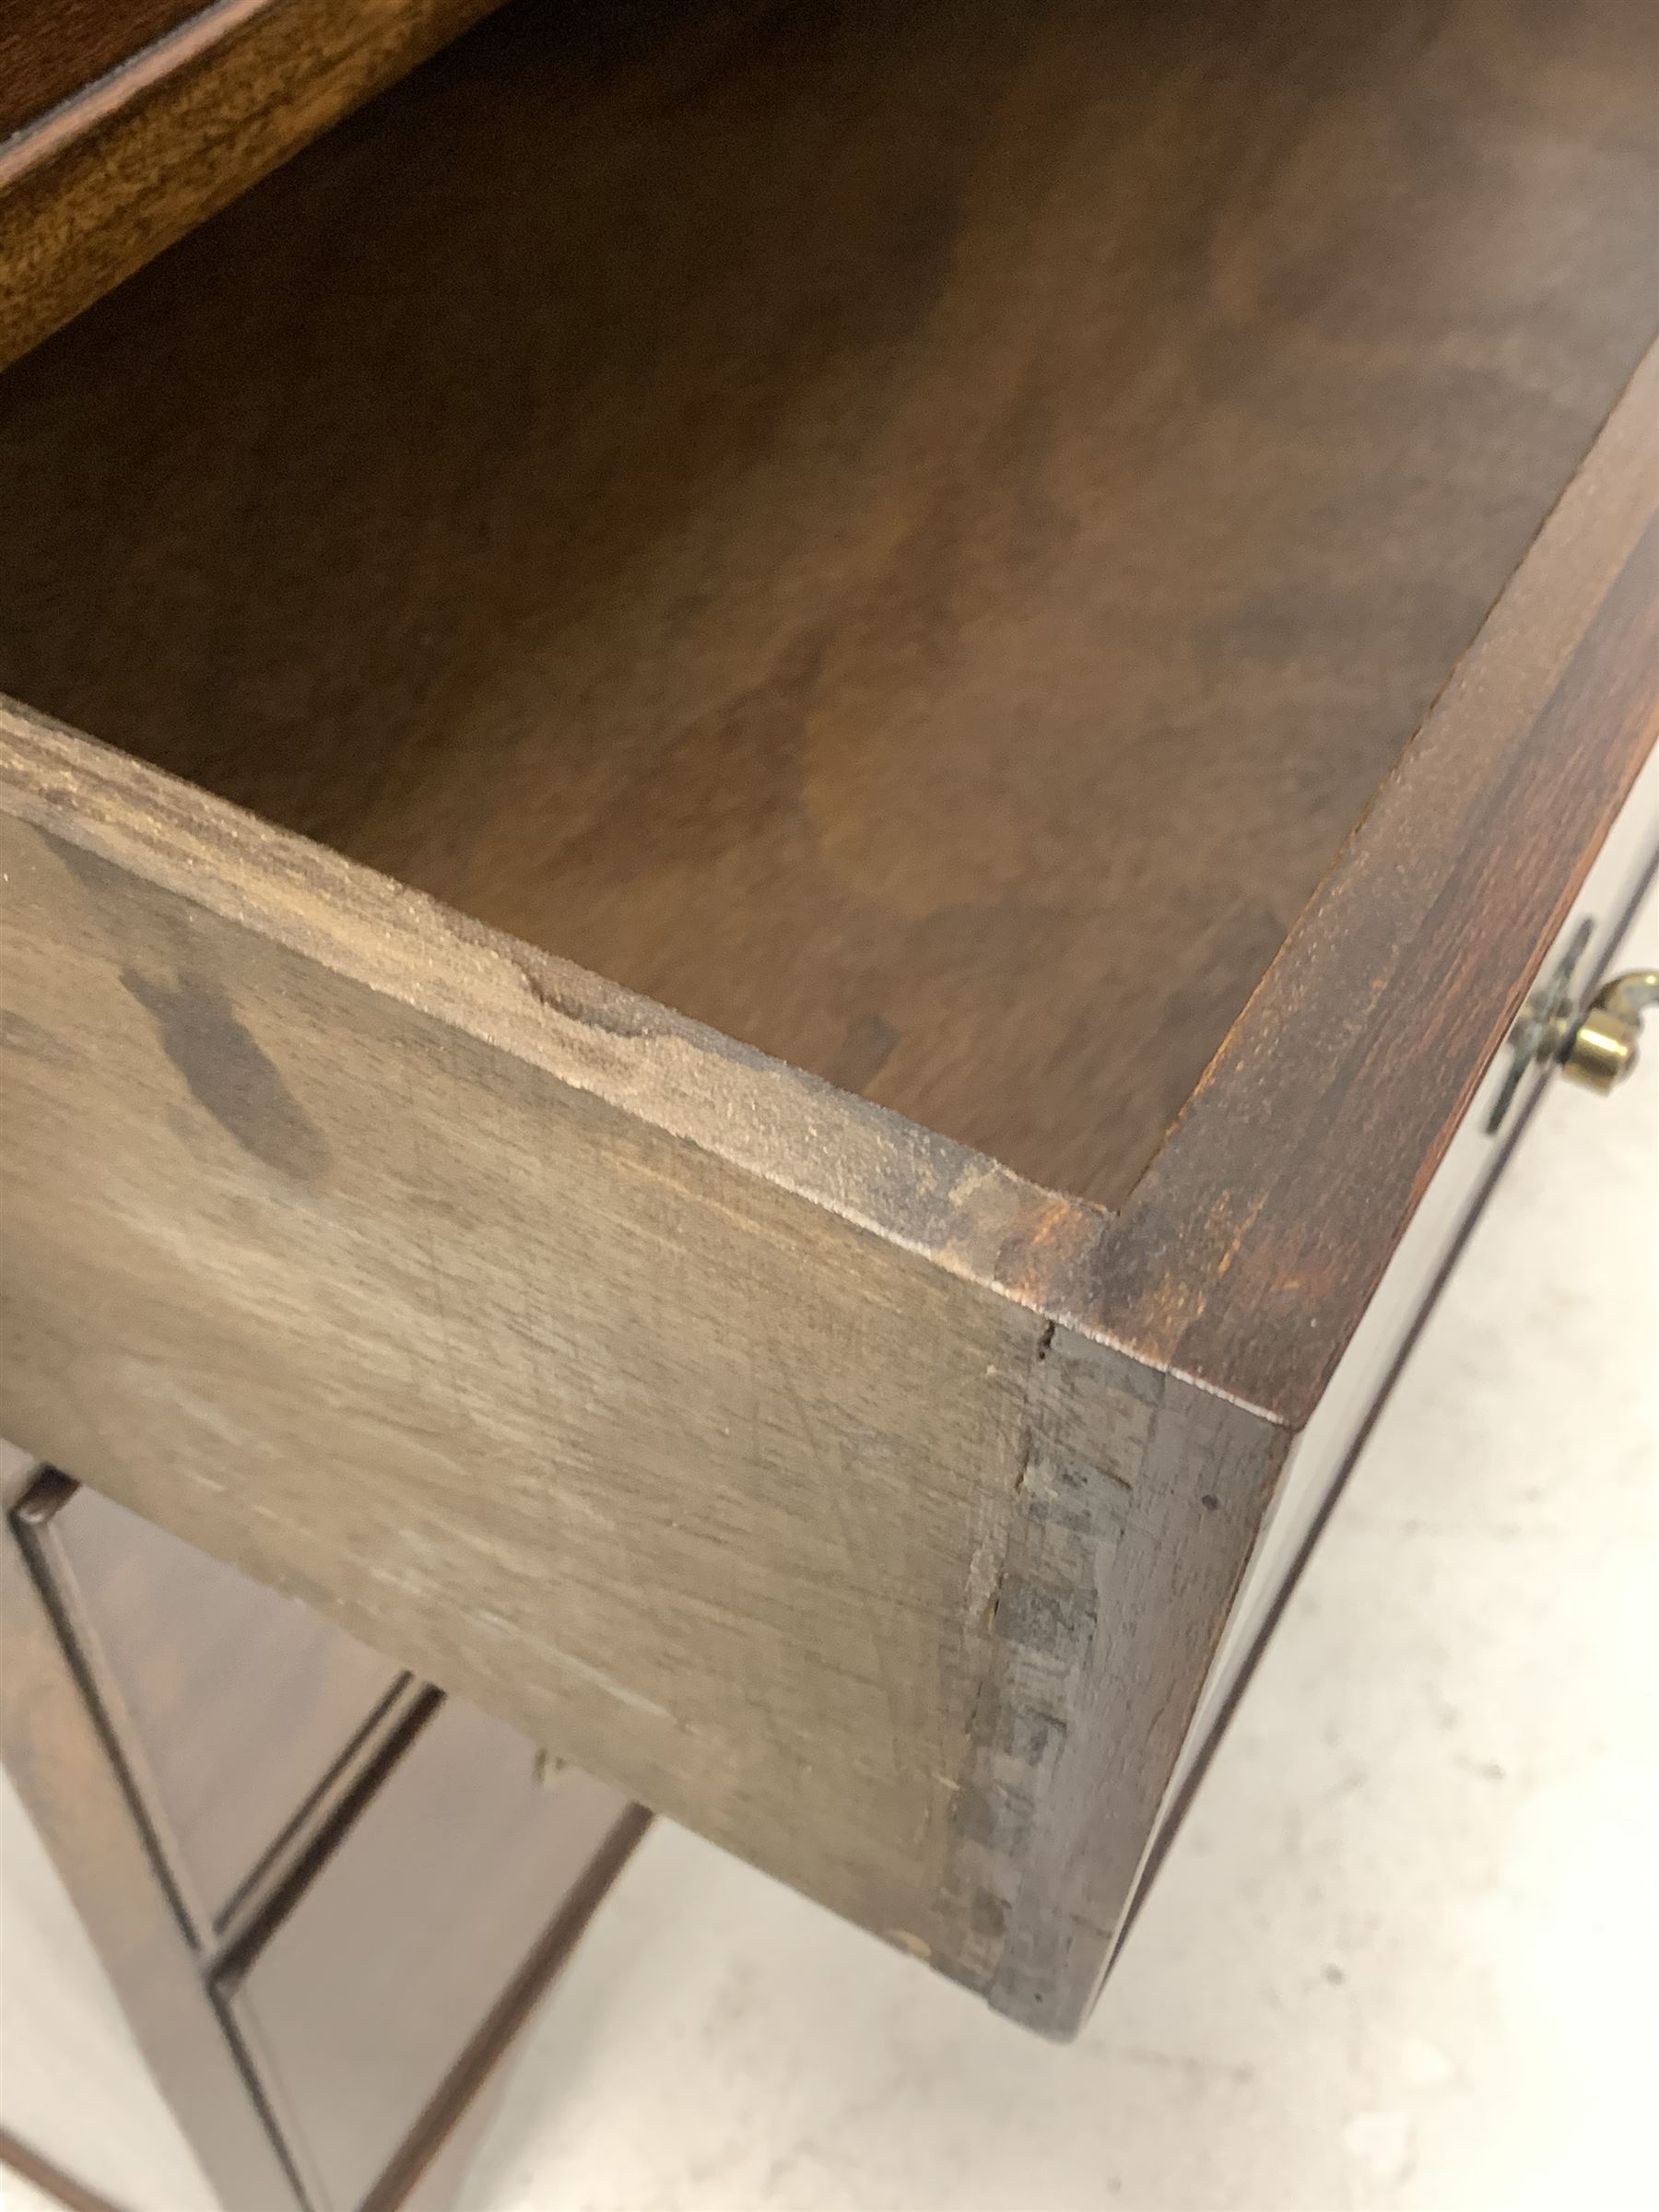 Early to mid 20th century mahogany chest - Image 3 of 5